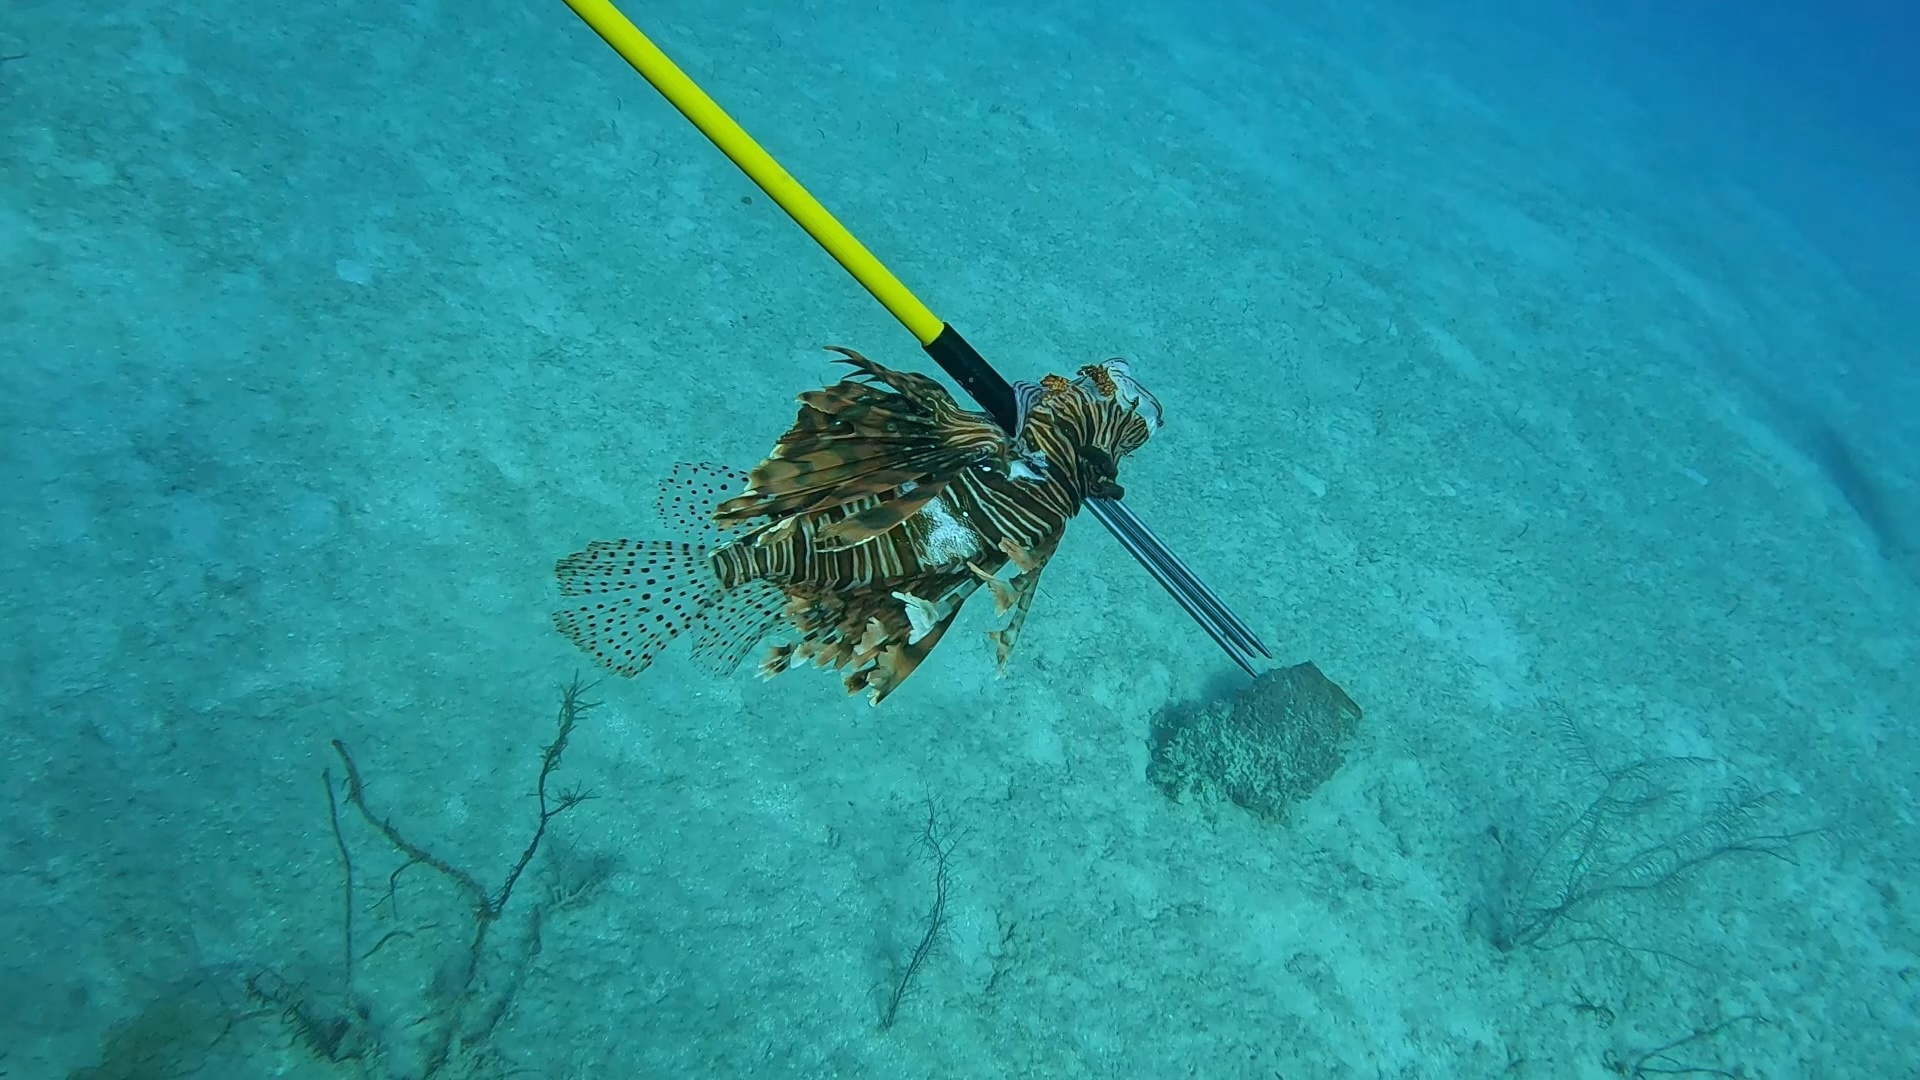 A lionfish skewered on a spearfishing pole spear.